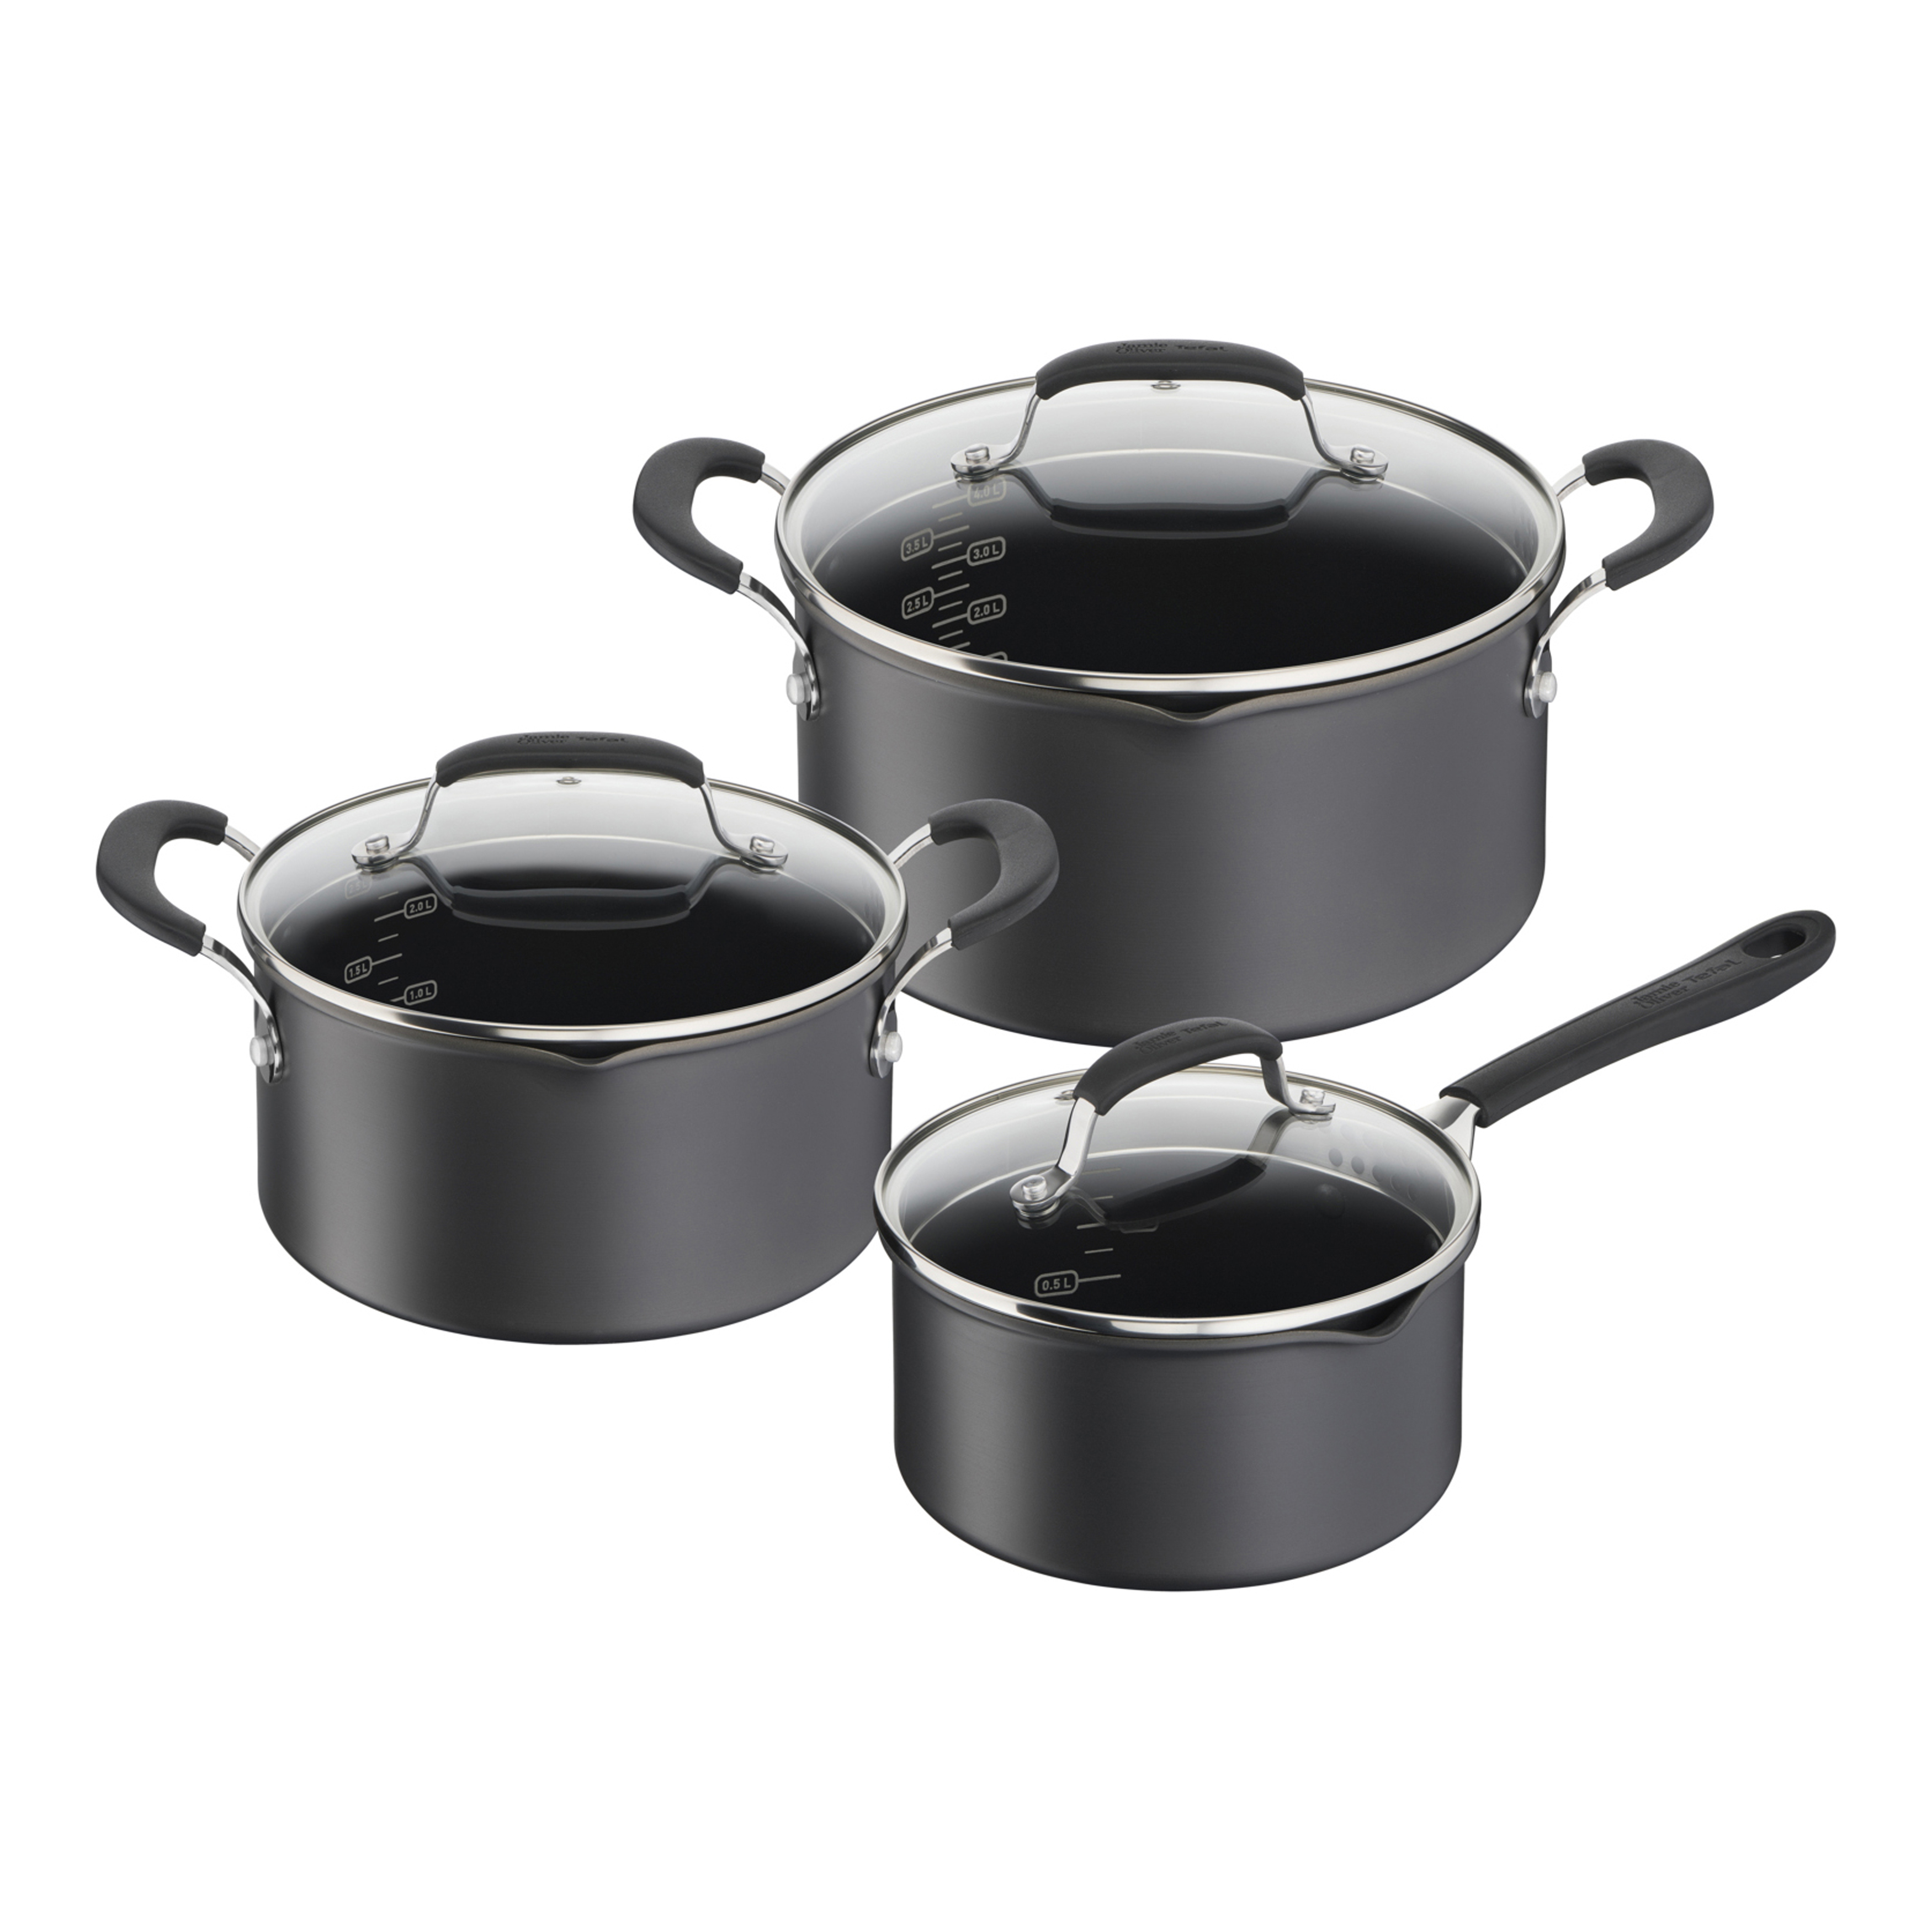 Jamie Oliver Quick & Easy sauce pan set 6 pieces from Tefal